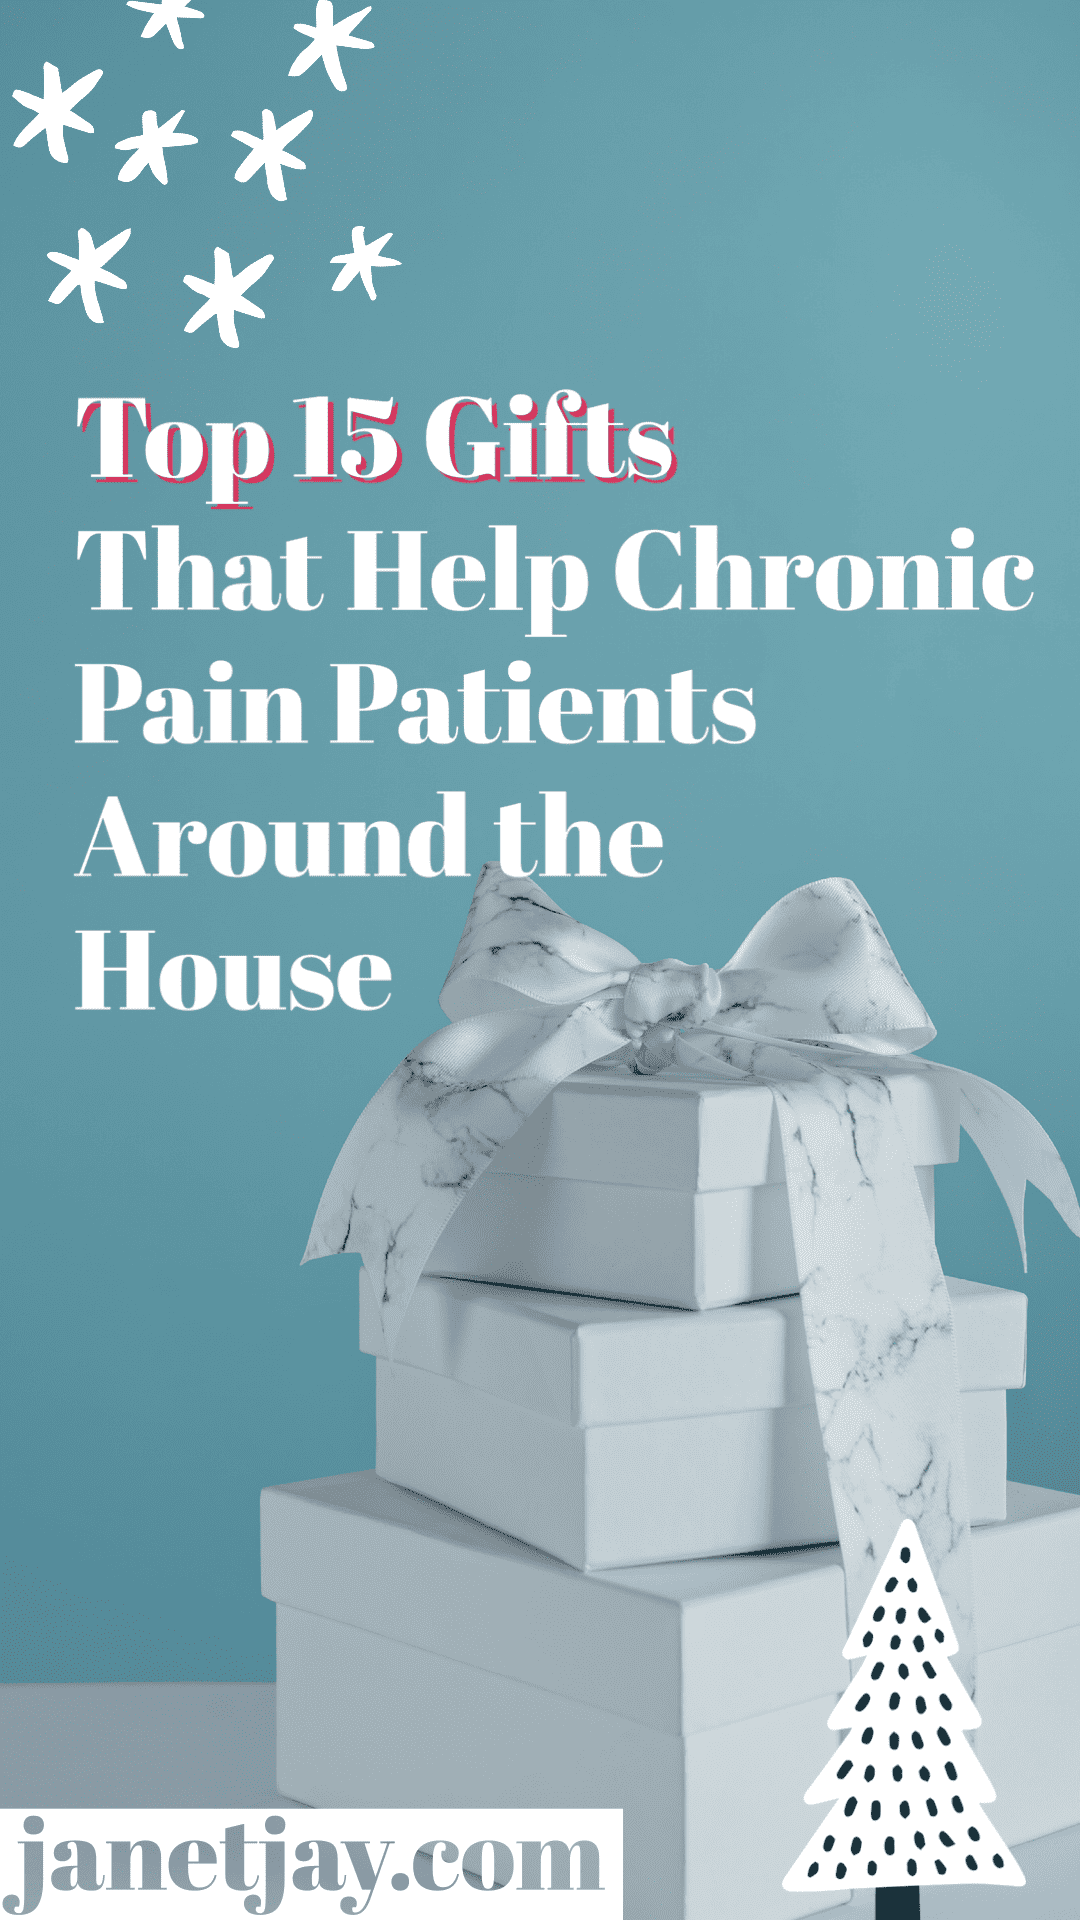 three white wrapped gifts sit in front of a teal background with snow and christmas tree clipart, text reads "top 15 gifts that help chronic pain patients around the house, janetjay.com"